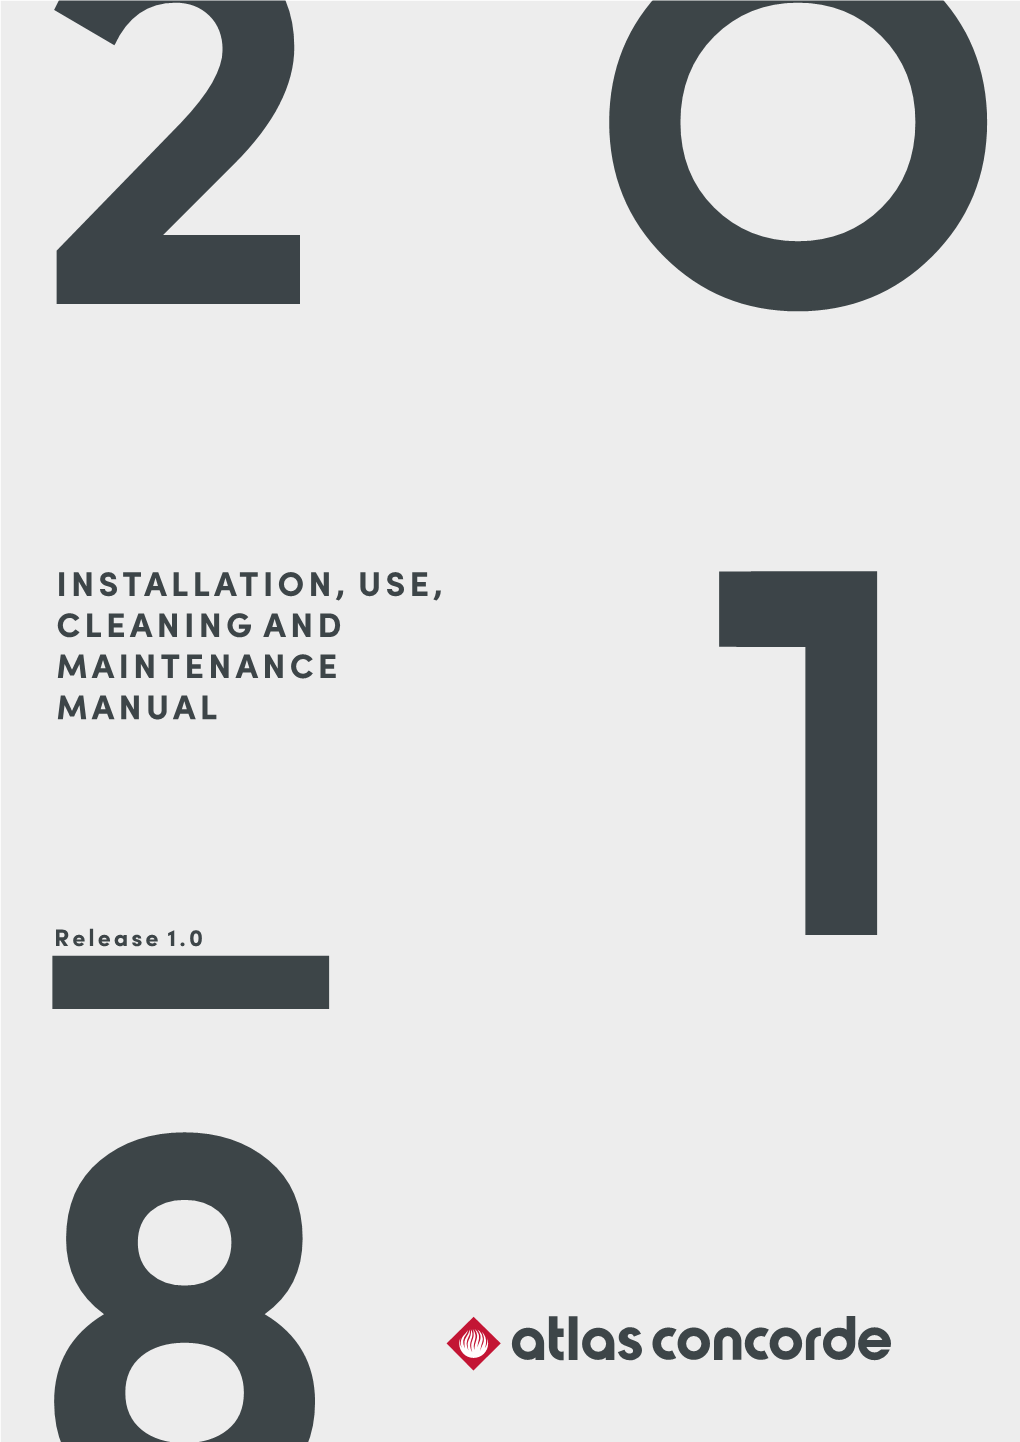 Installation, Use, Cleaning and Maintenance Manual